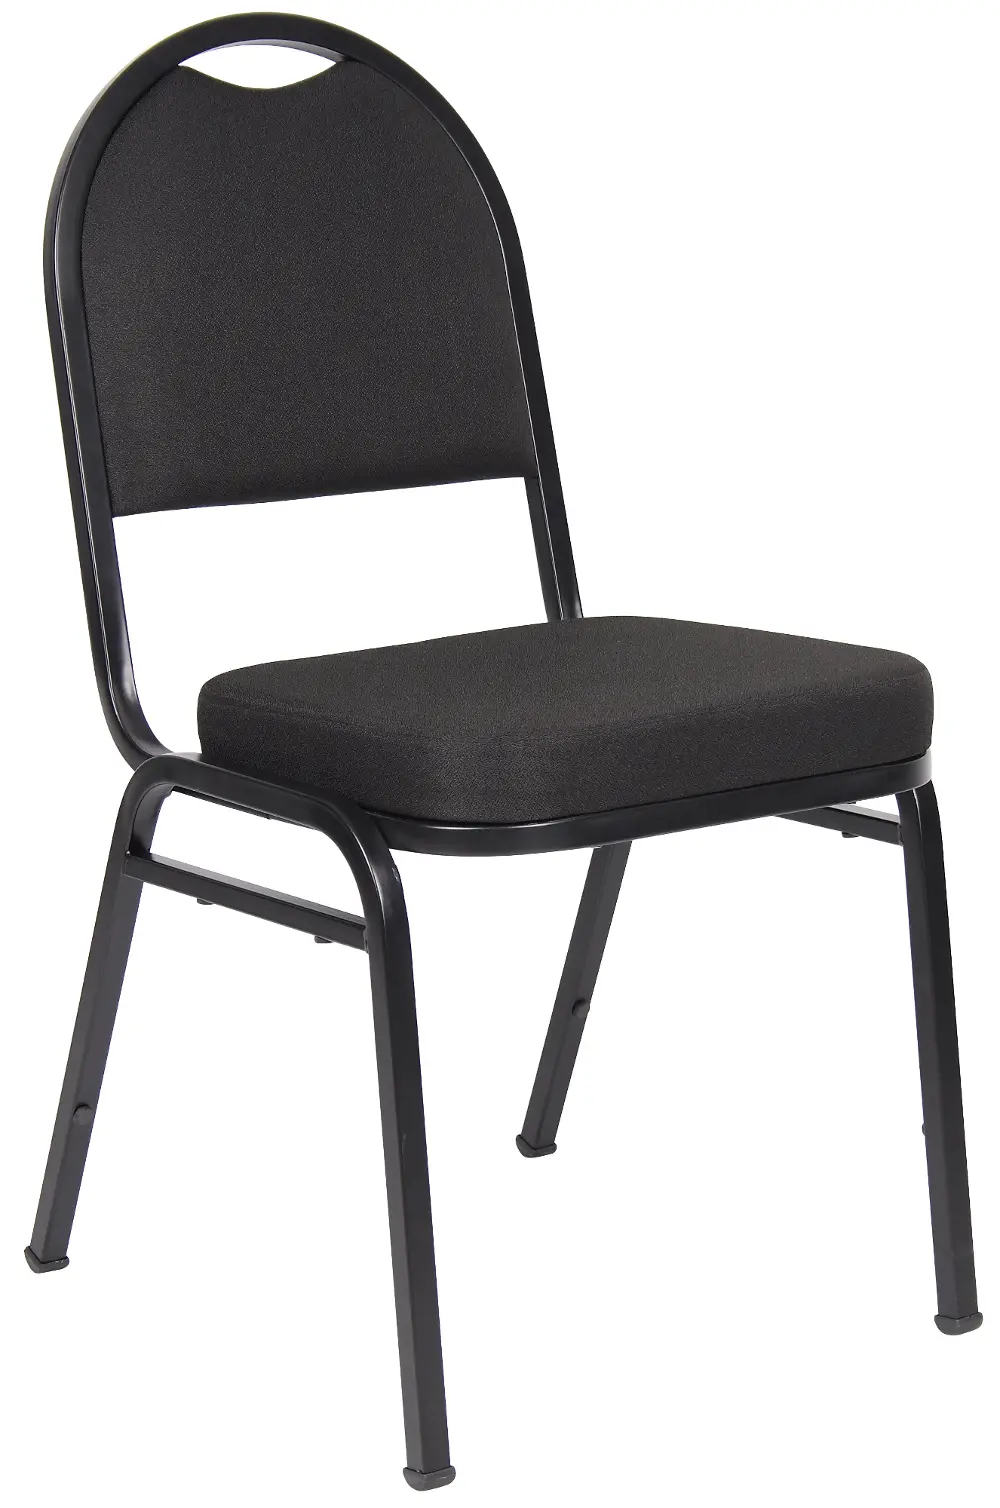 Set of 4 Black Stackable Banquet Chairs-1